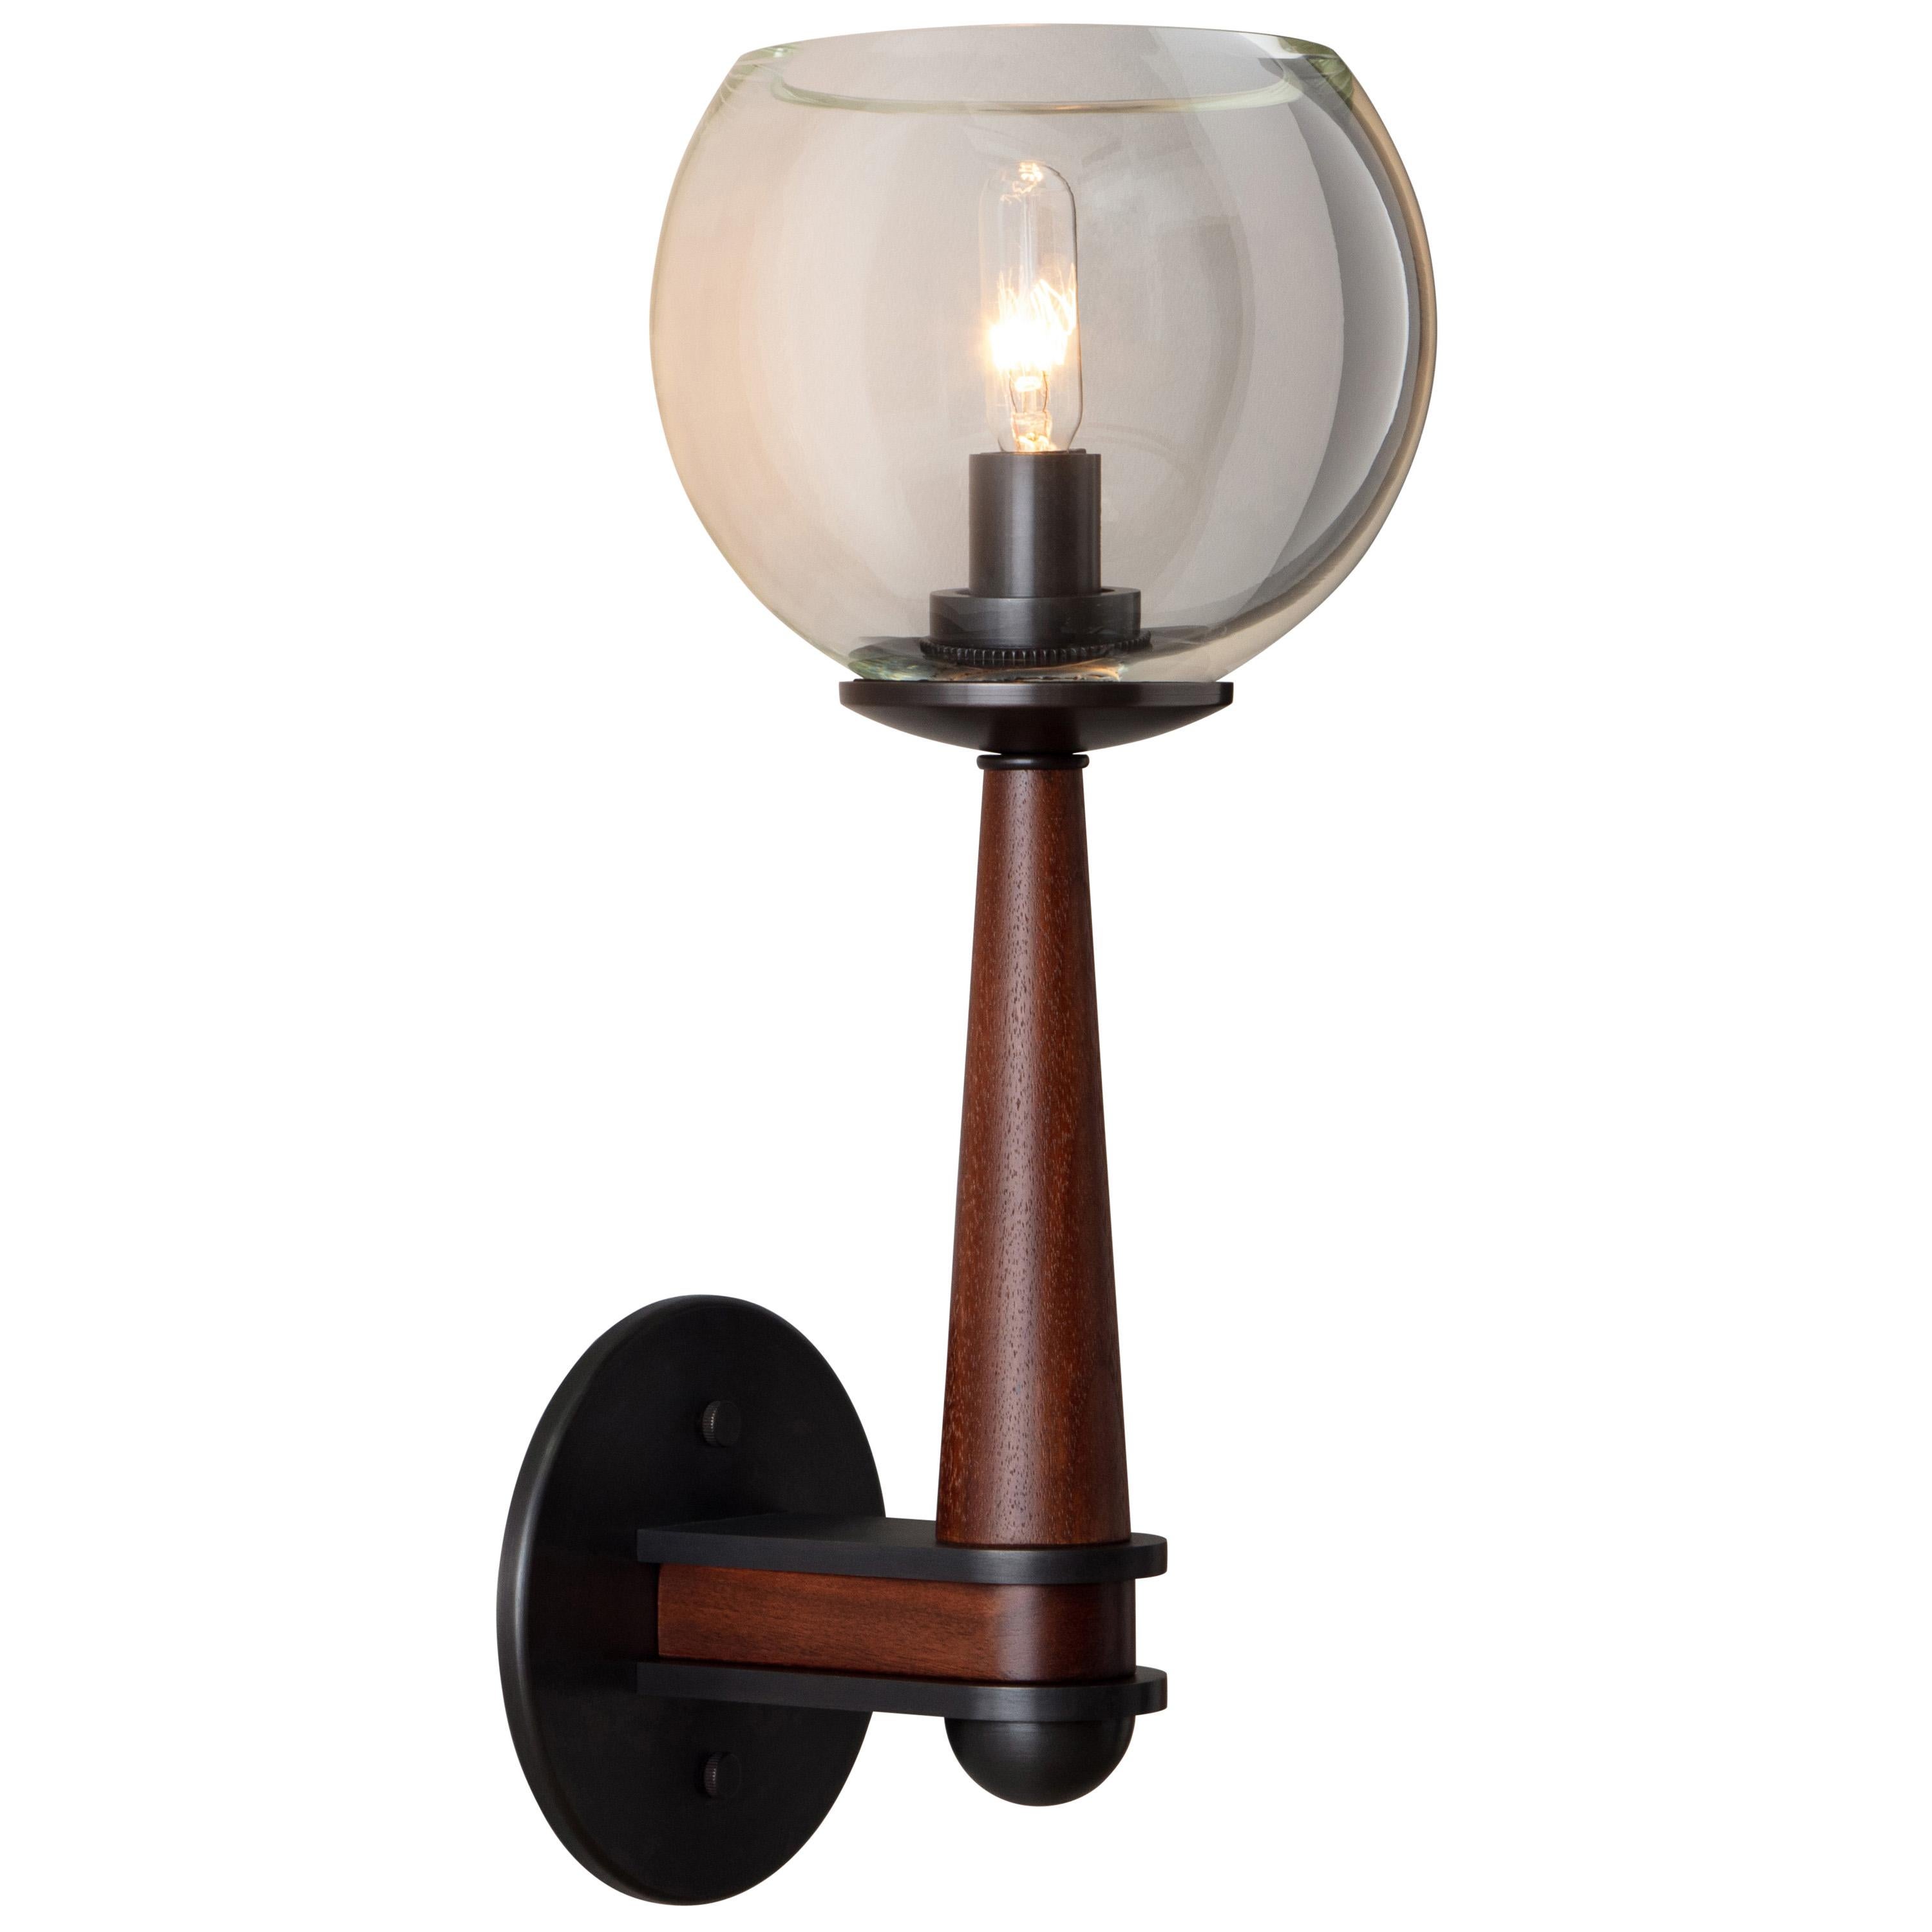 Giotto Sconce (Standard) in Walnut and Brass Finishes By Matthew Fairbank